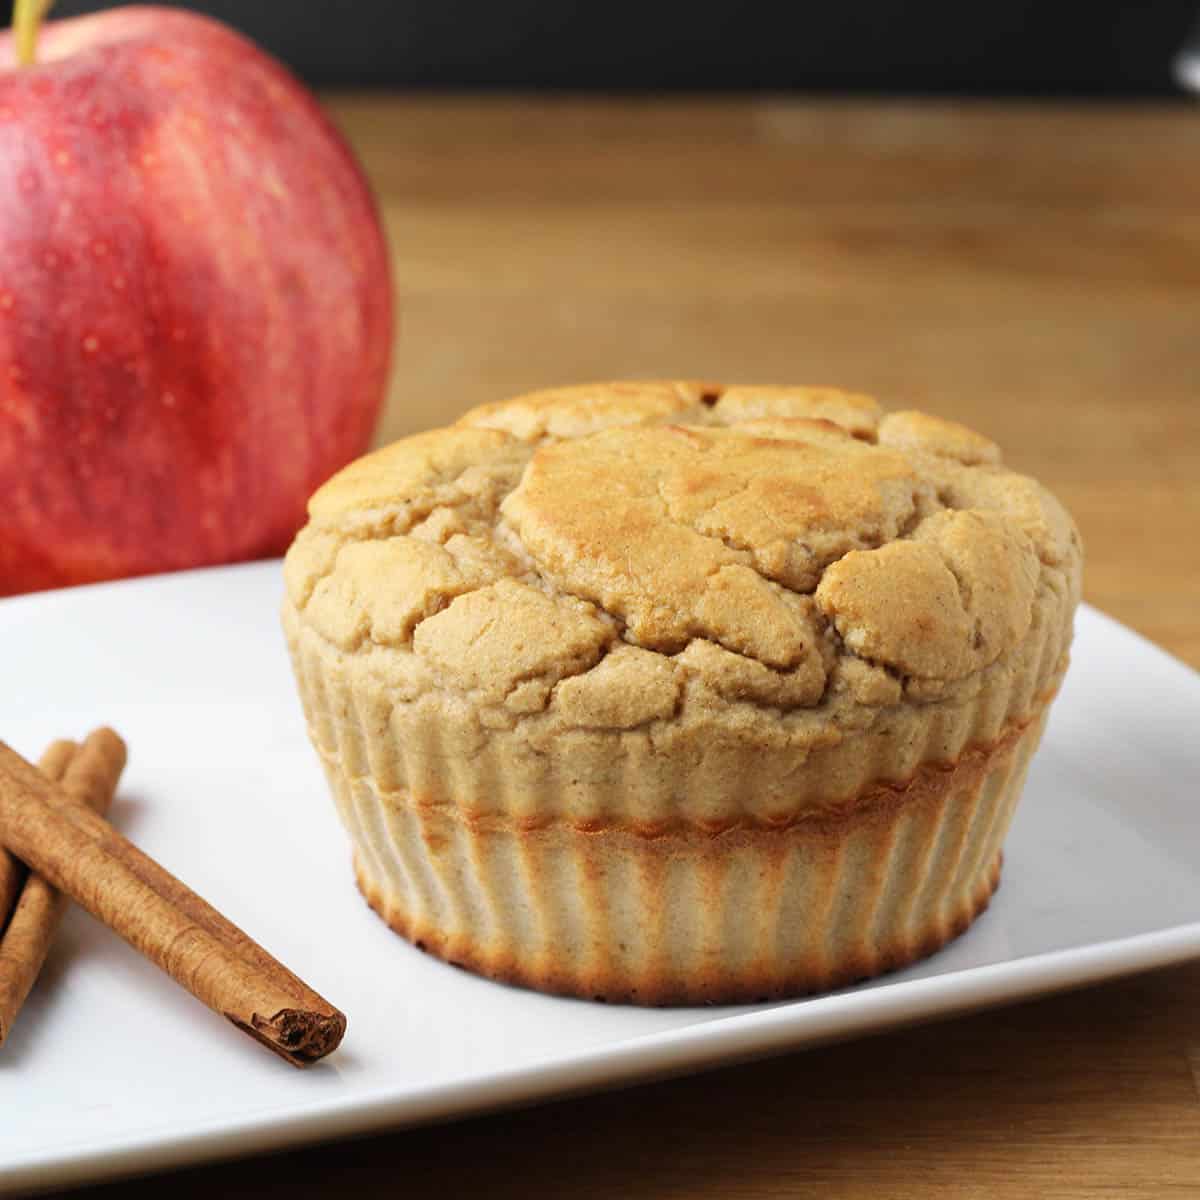 a cinnamon apple protein muffin on a white plate with two cinnamon sticks and an apple in the background on a wooden table